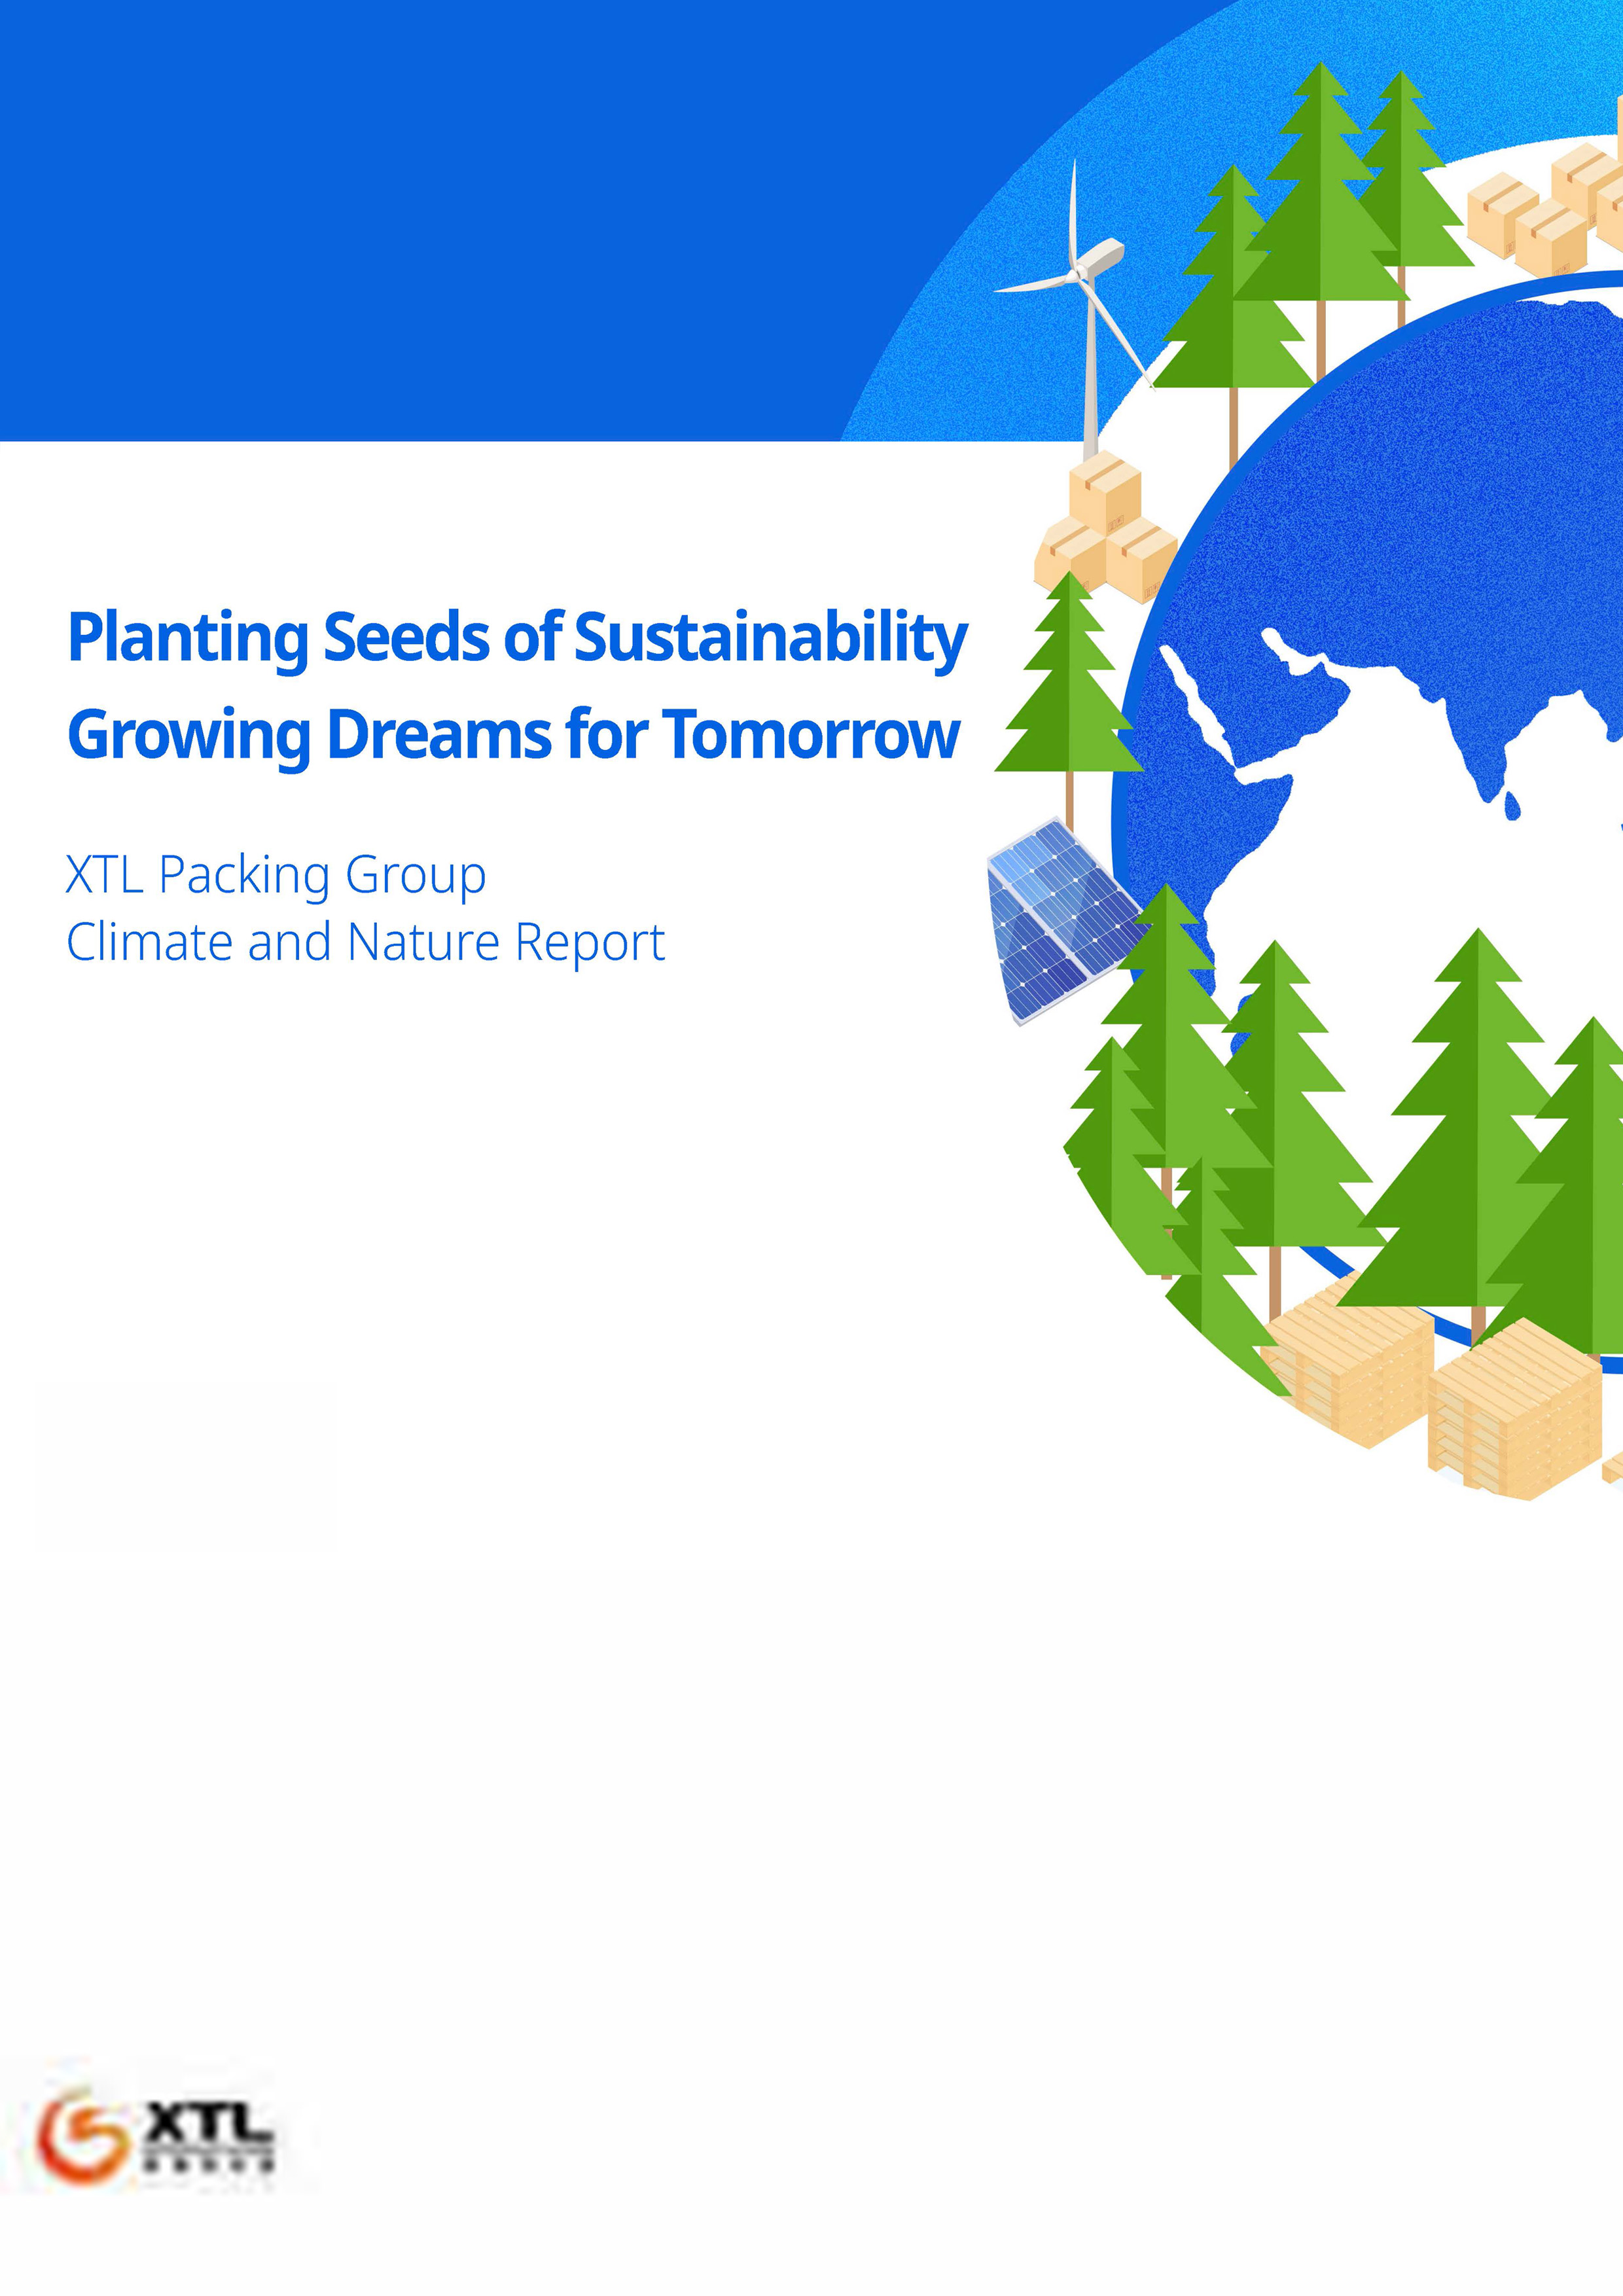 XTL Packing Group Climate and Nature Report